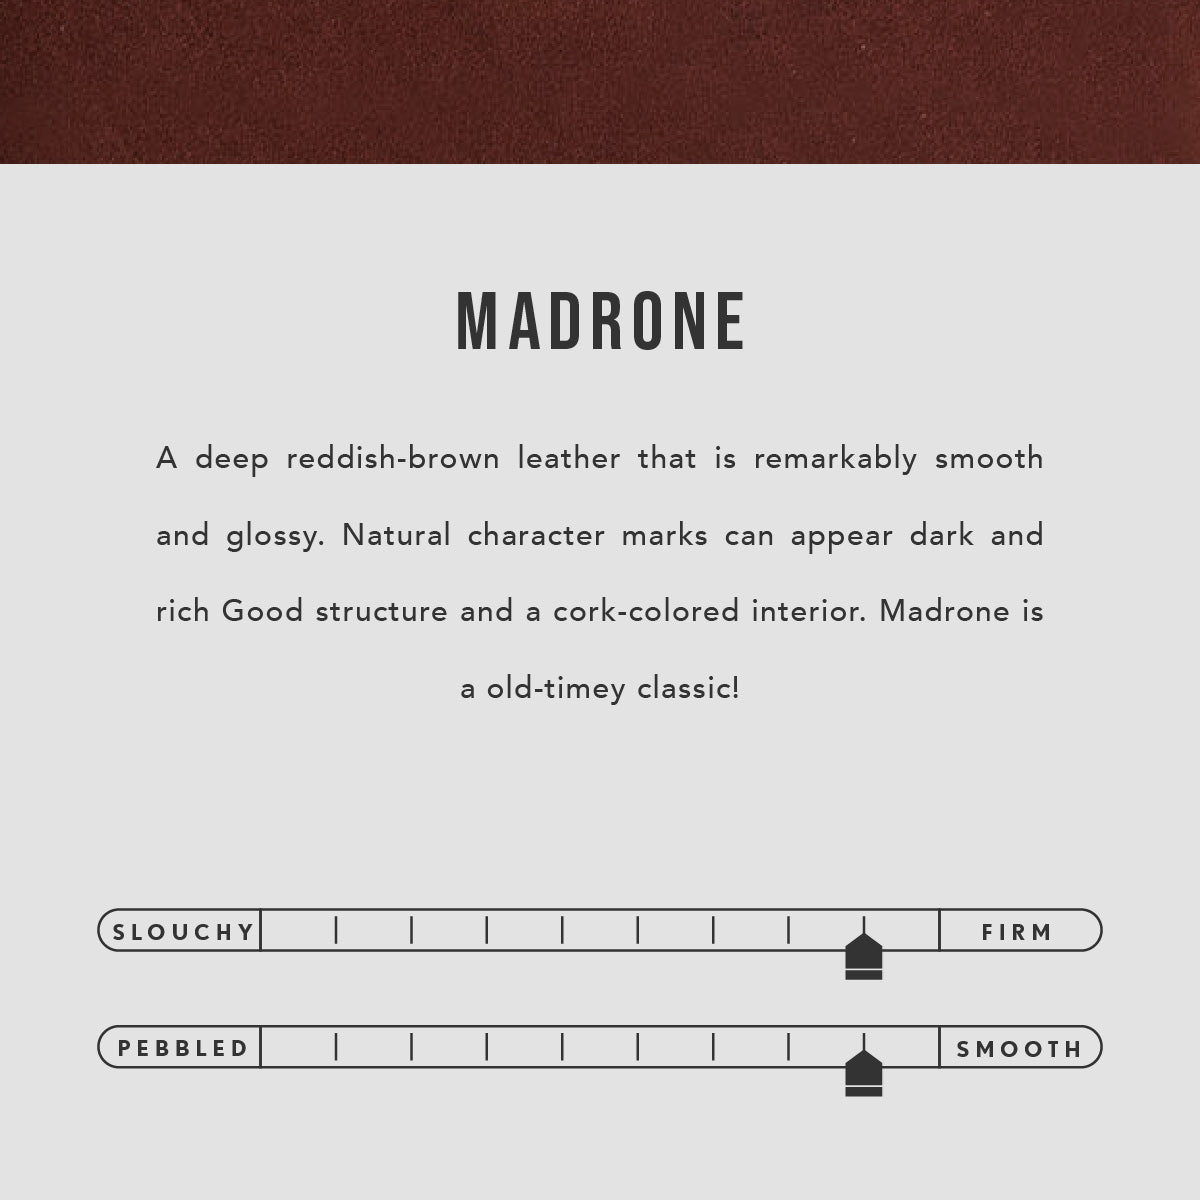 Madrone | infographic